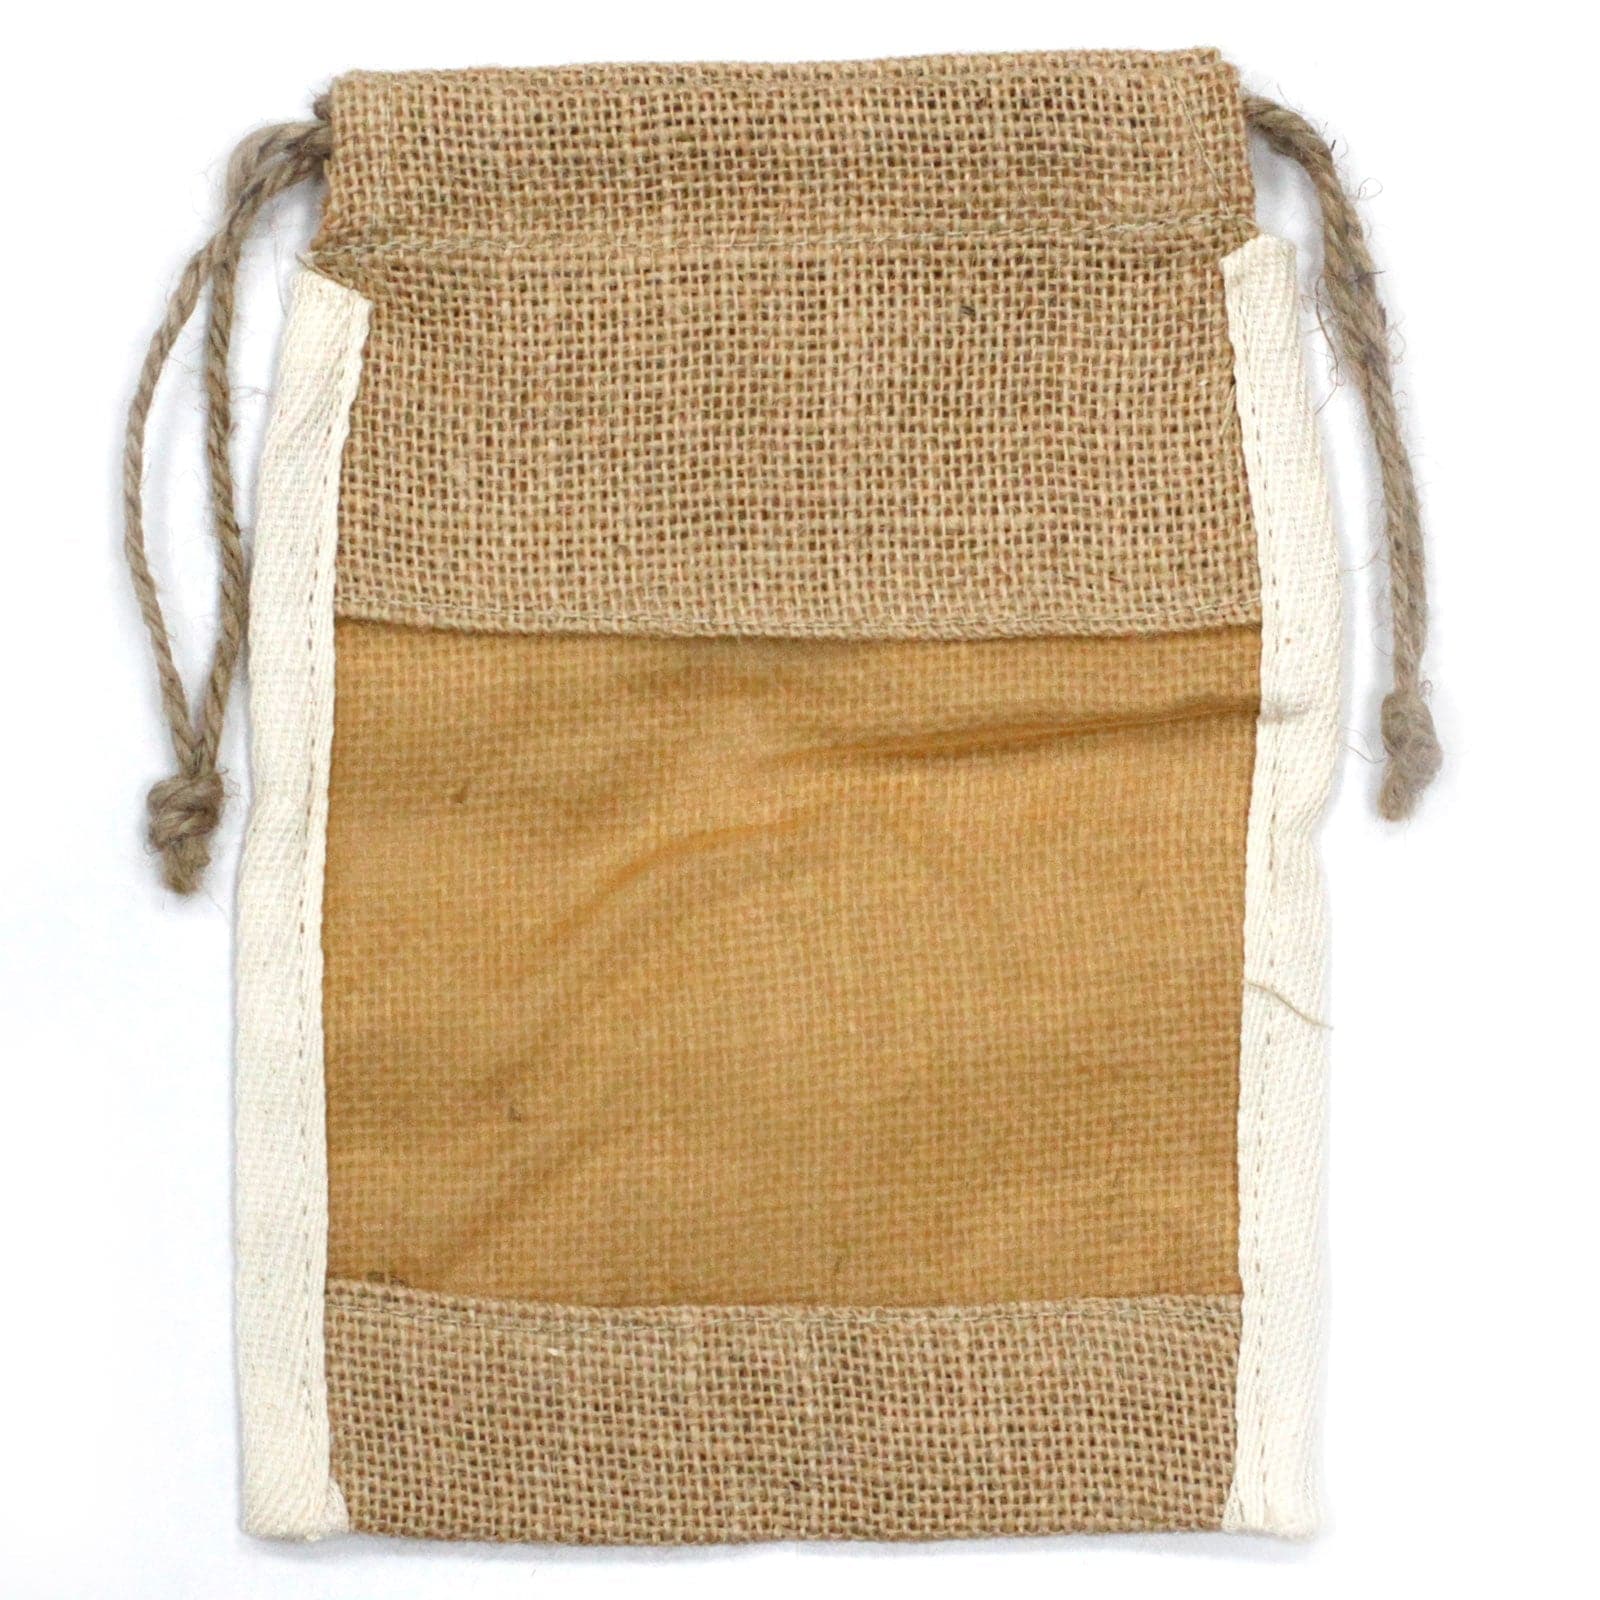 Med Washed Jute Pouch - 21x15cm - best price from Maltashopper.com NATWP-06